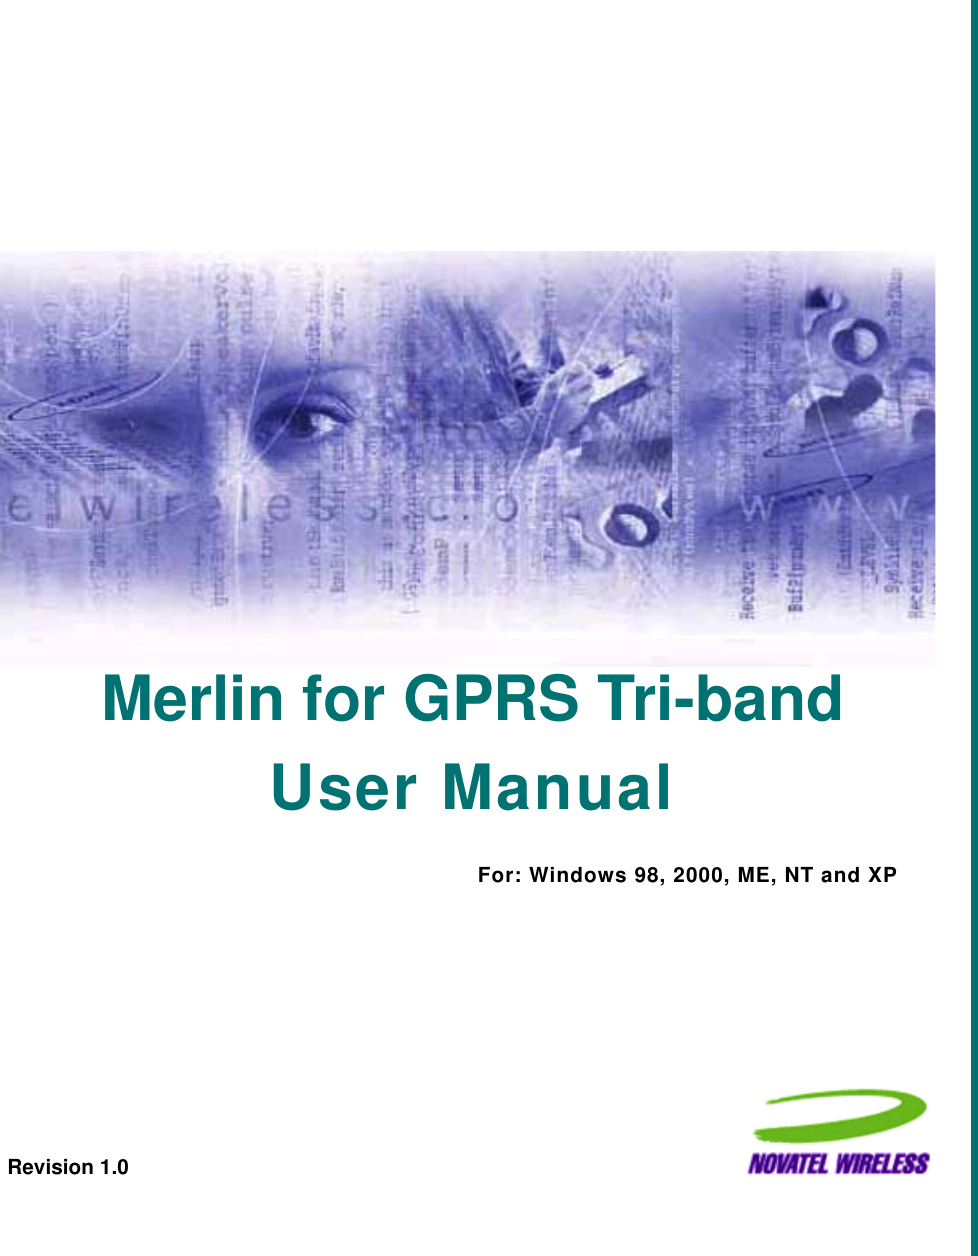 Merlin for GPRS Tri-bandUser ManualRevision 1.0For: Windows 98, 2000, ME, NT and XP